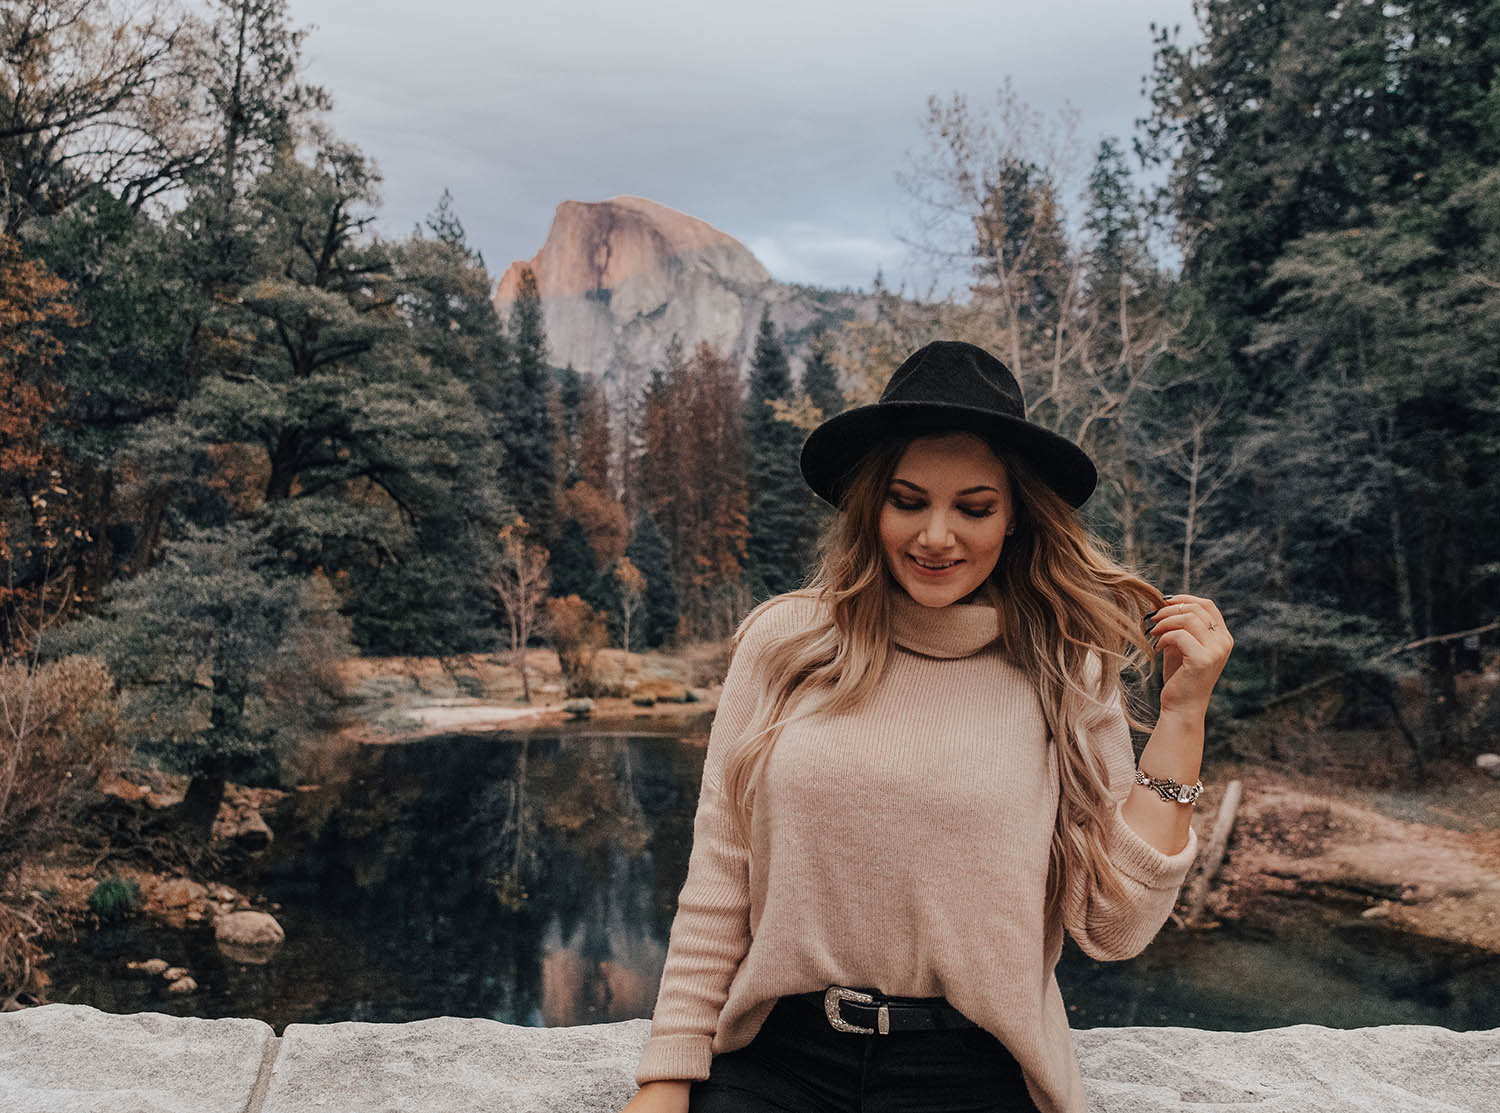 Cozy pink knit & hat outfit - in Yosemite National Park